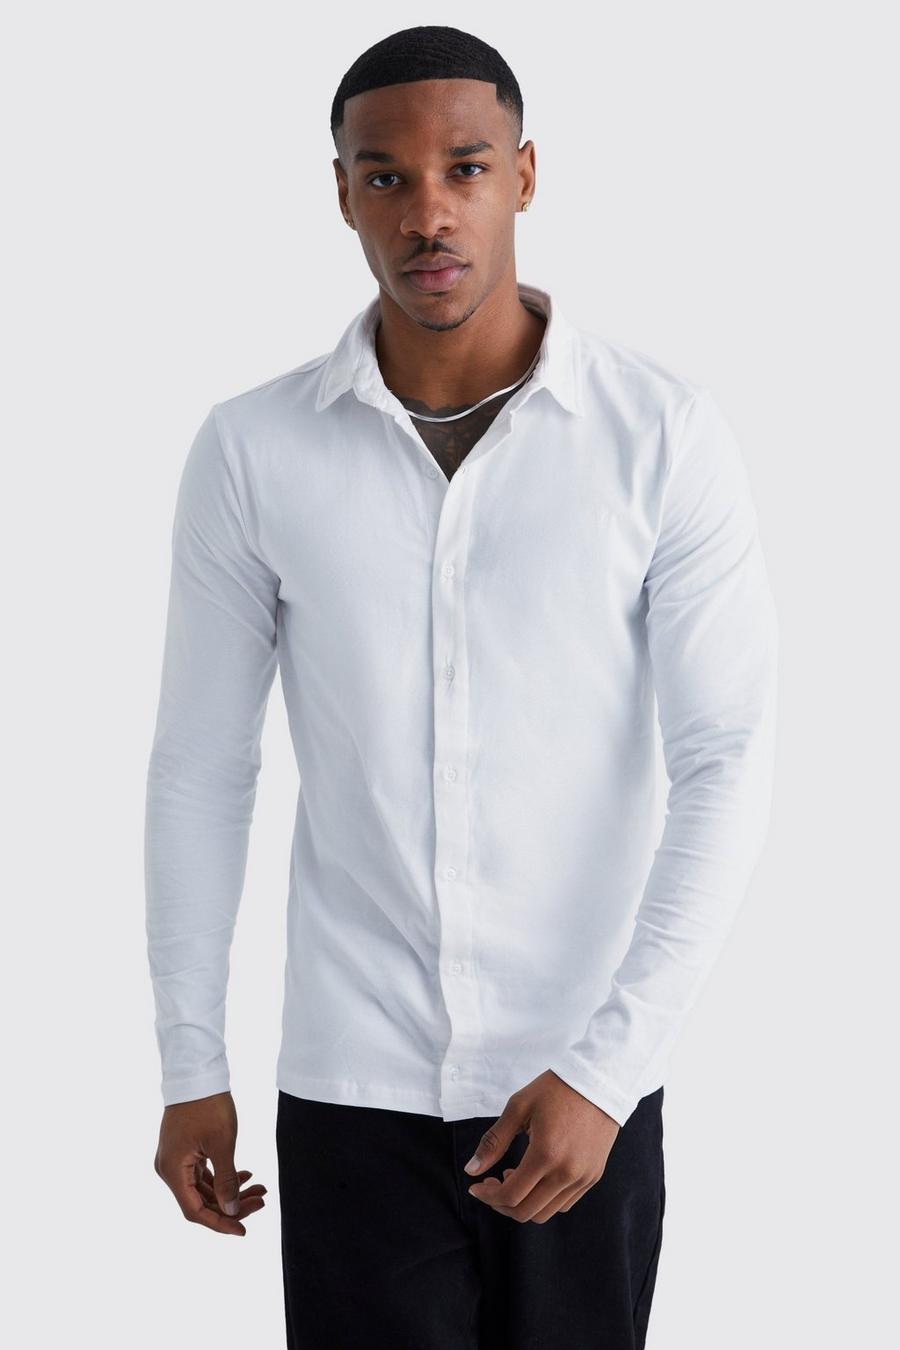 White t-shirt blanc fines rayures noires H&M image number 1